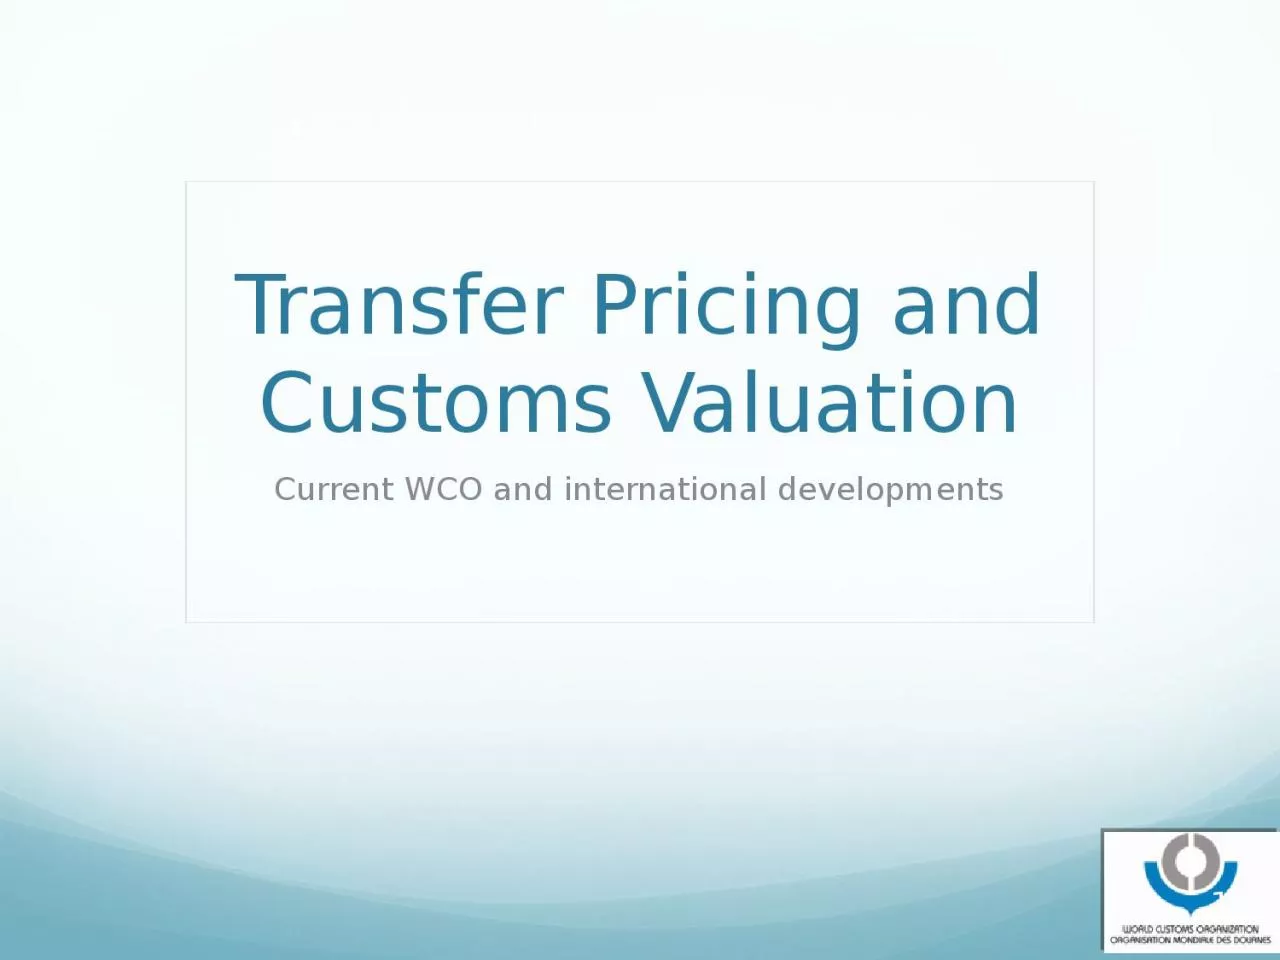 Transfer Pricing and Customs Valuation